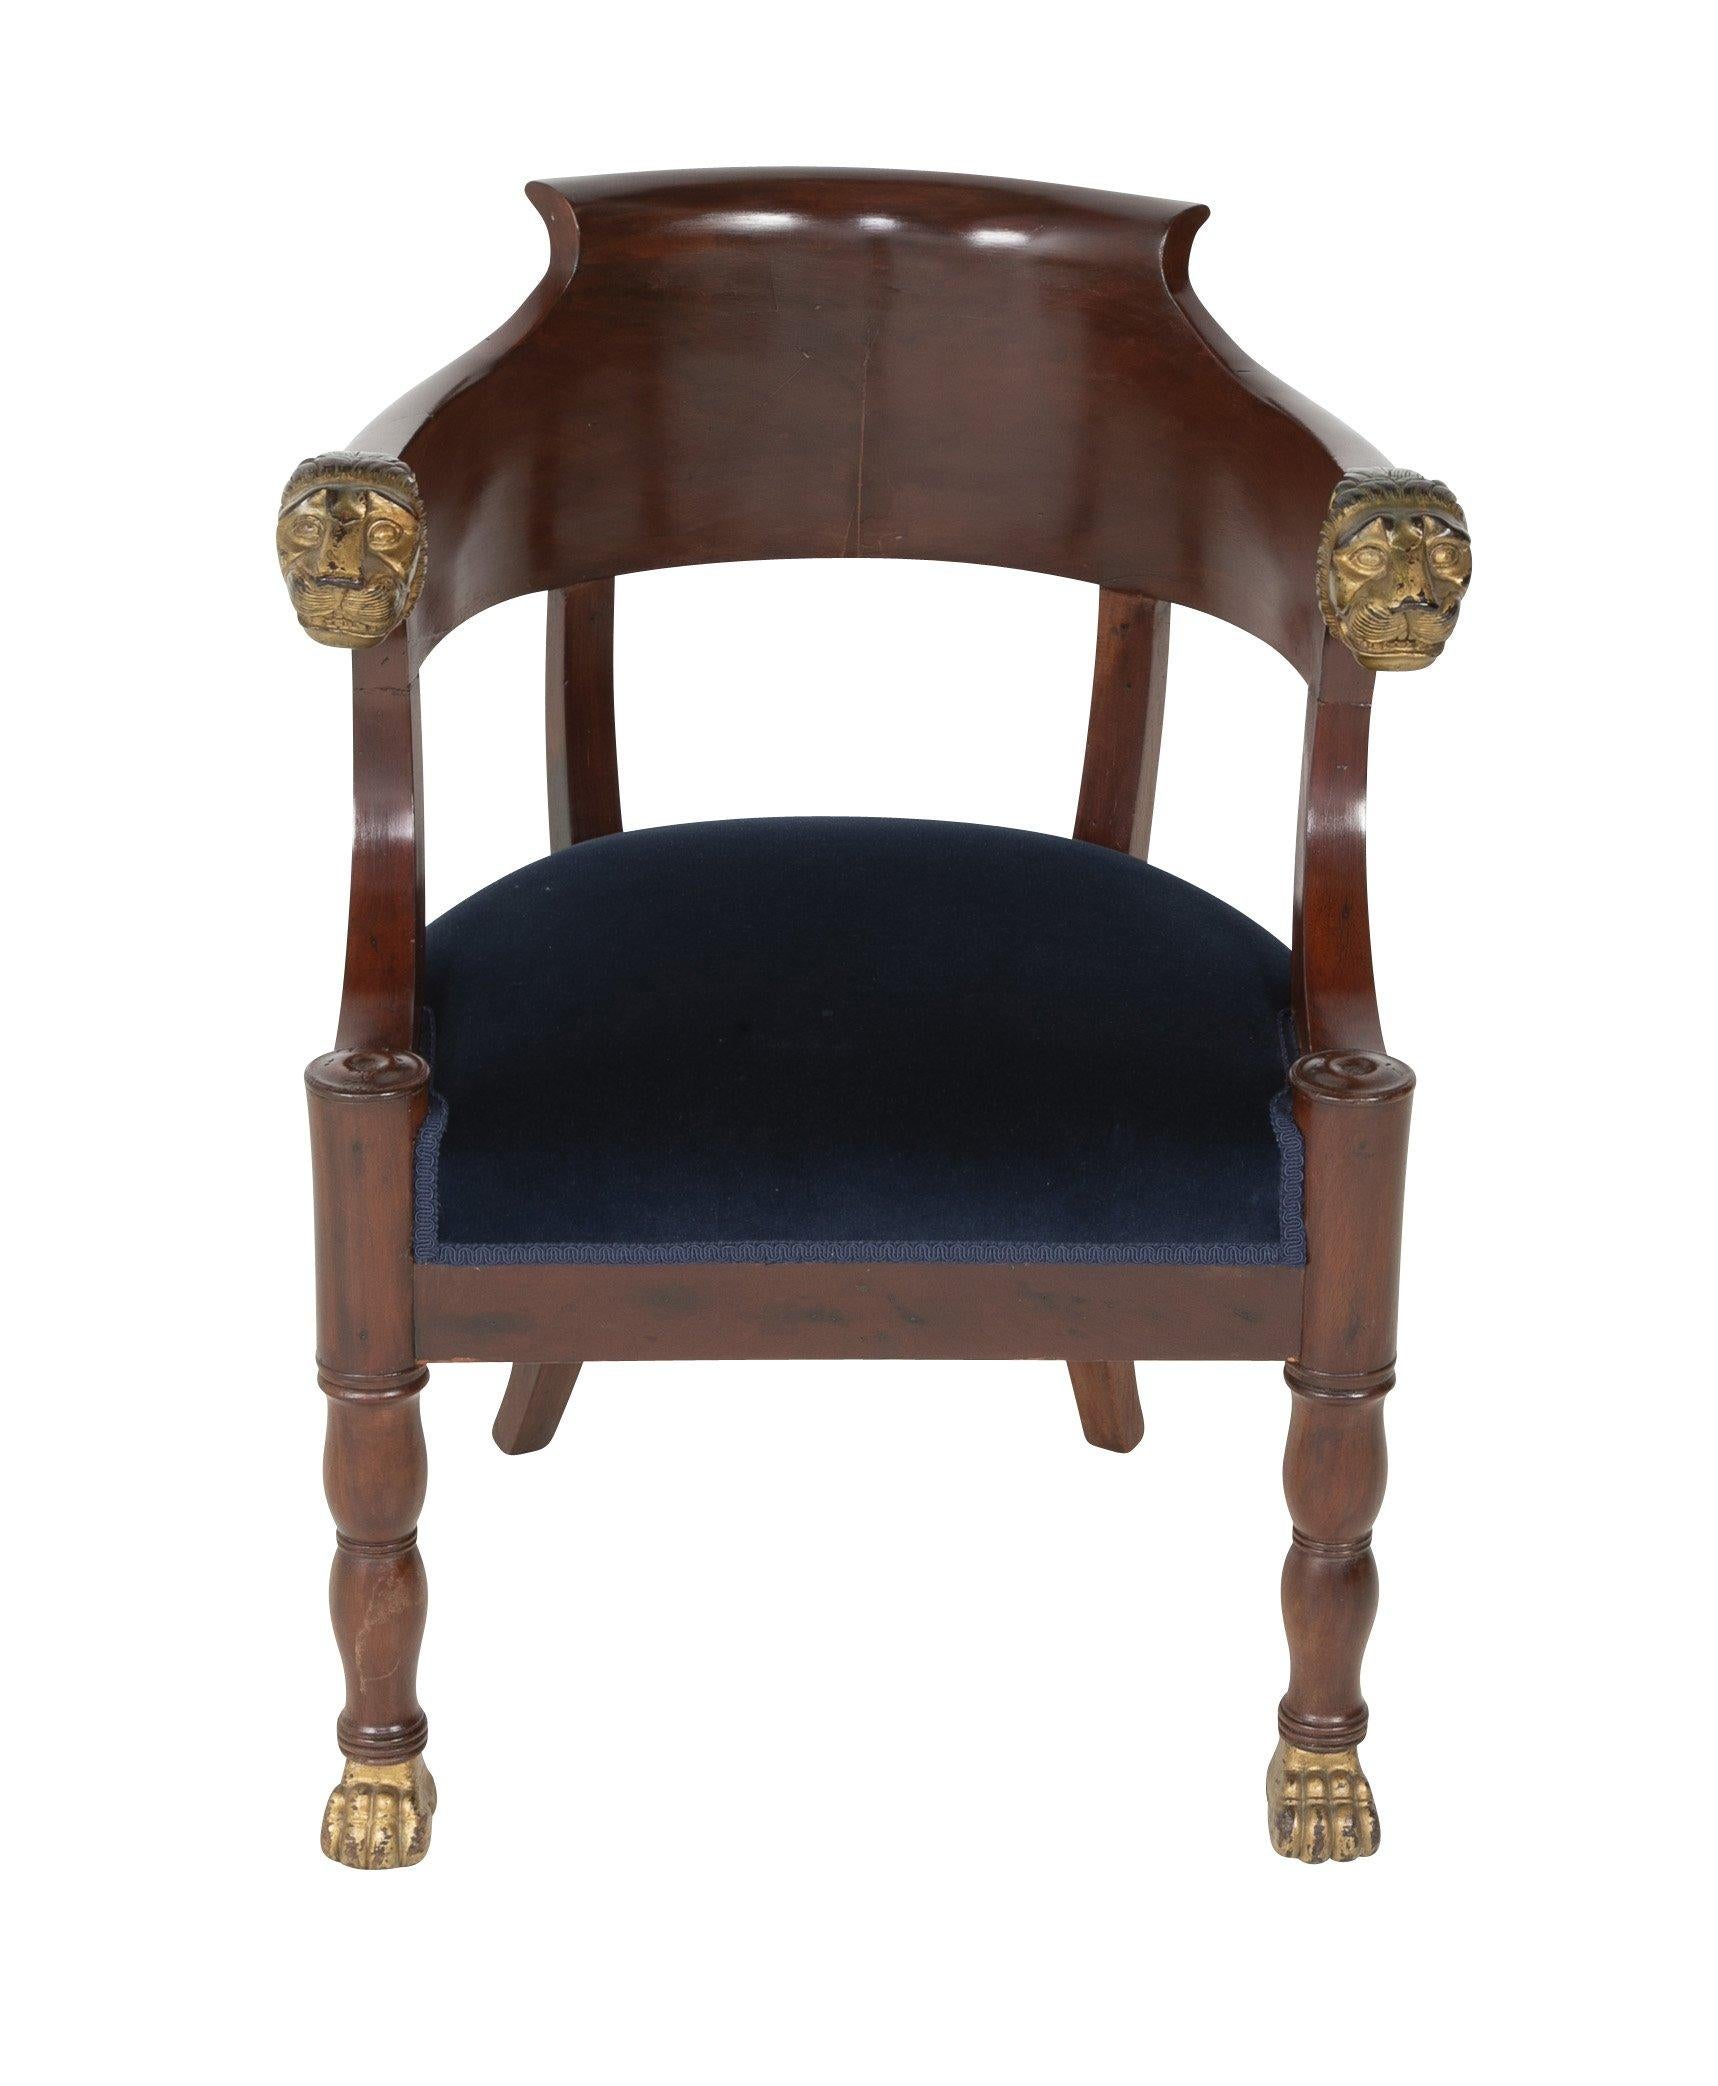 Empire mahogany paw foot Fauteuil de Bureau with giltwood lion's head arms, circa 1815.


We are proud of our long-standing partnership with George N Antiques who specializes in fine authentic antique furniture and decorative objects of the 18th and